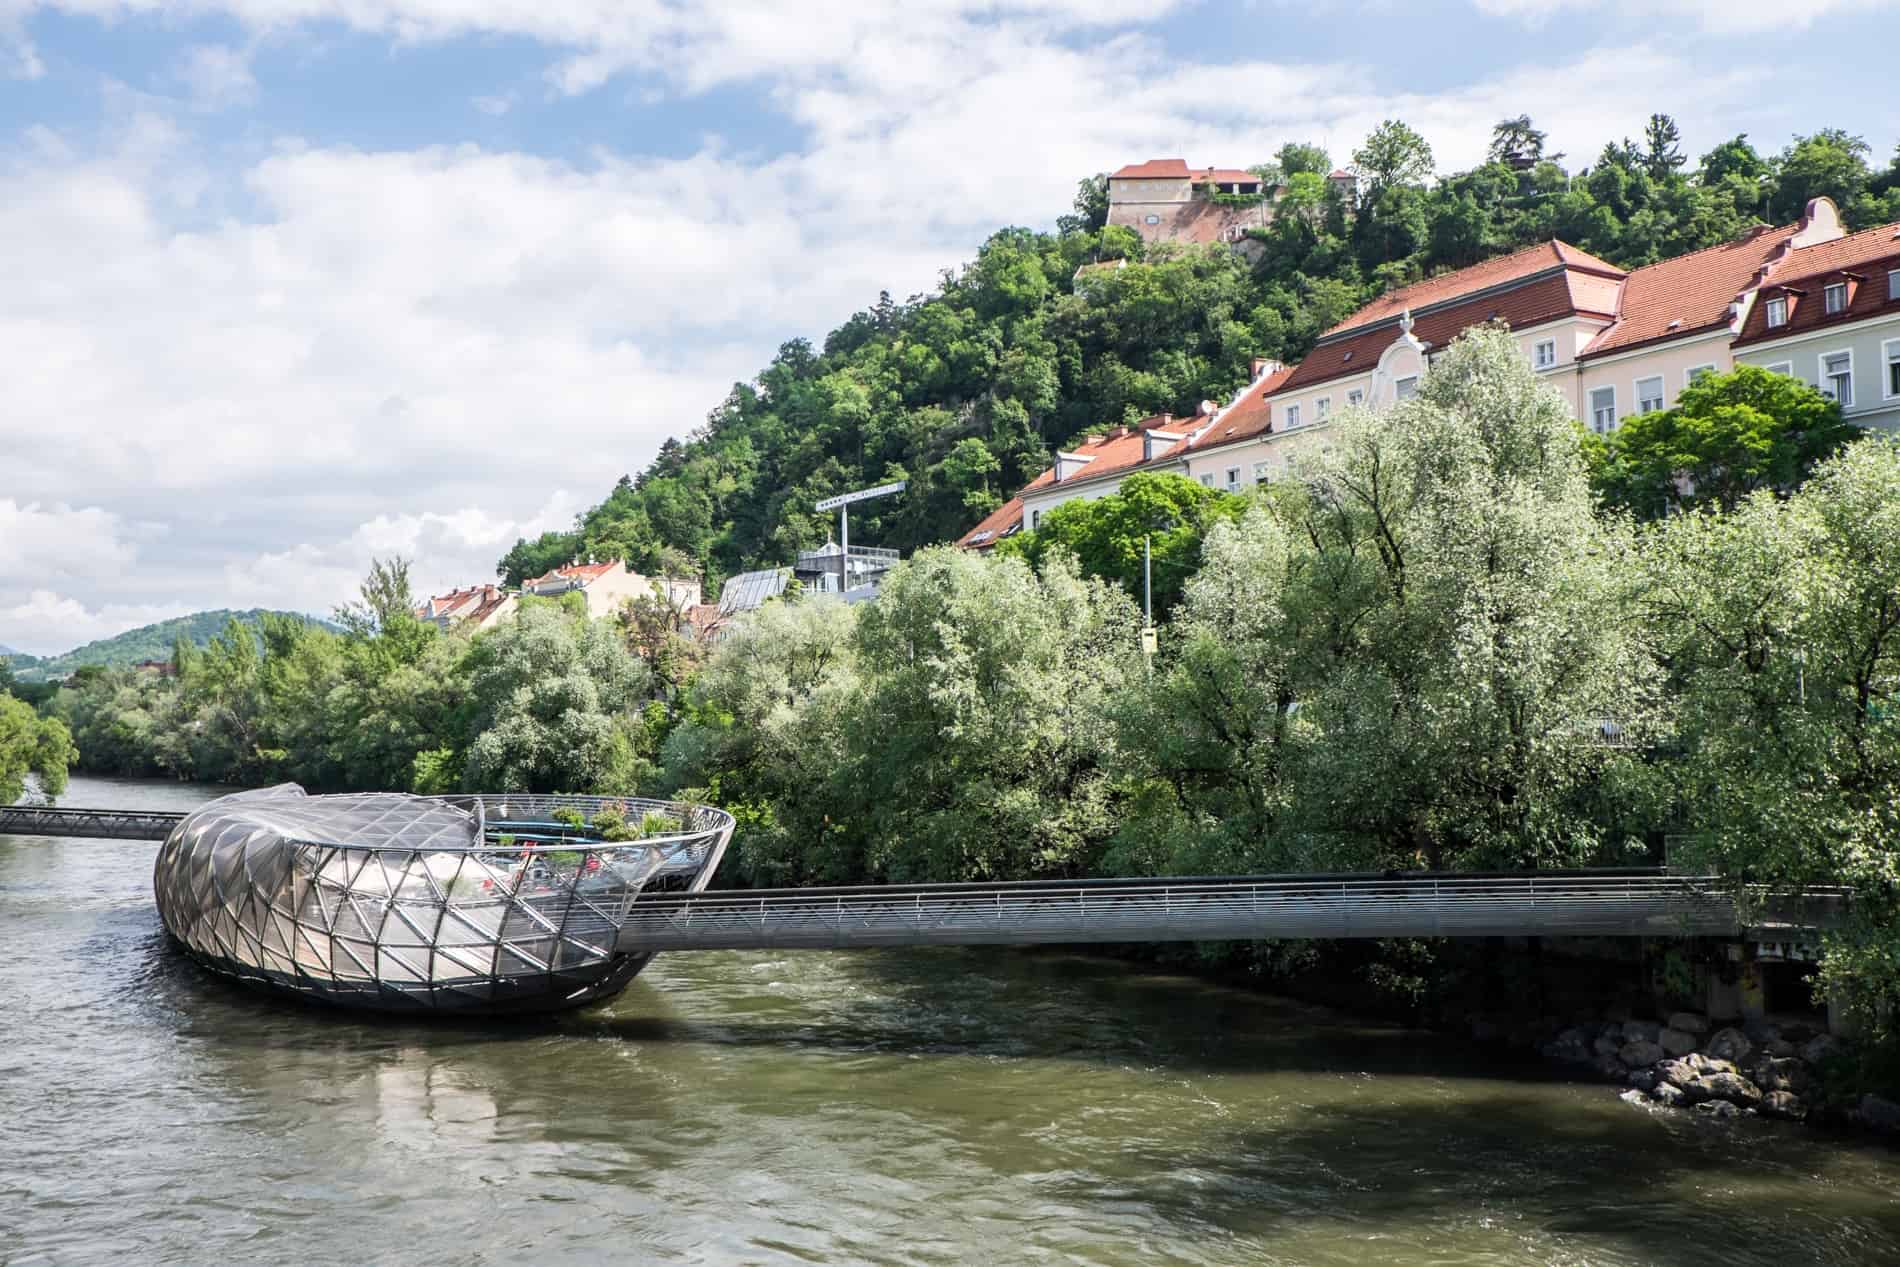 The steel and glass Murinsel café and exhibition space sitting in the middle of the Mur River in Graz, Austria.